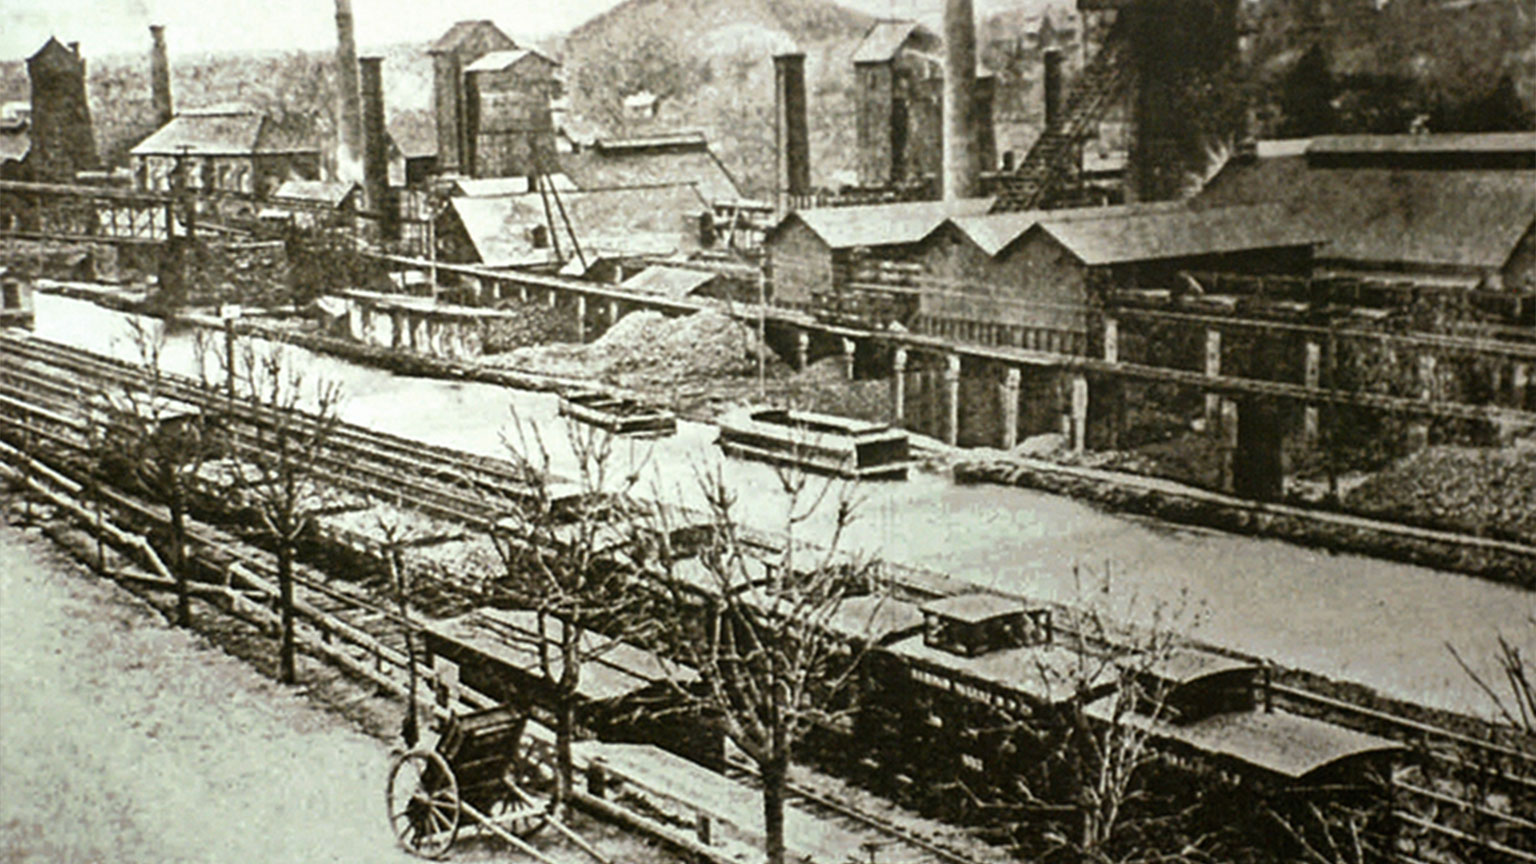 The Glendon Iron Co. was located on what is now Hugh Moore Park.  The island was completely covered with industrial buildings while the Iron Co. was in operation.